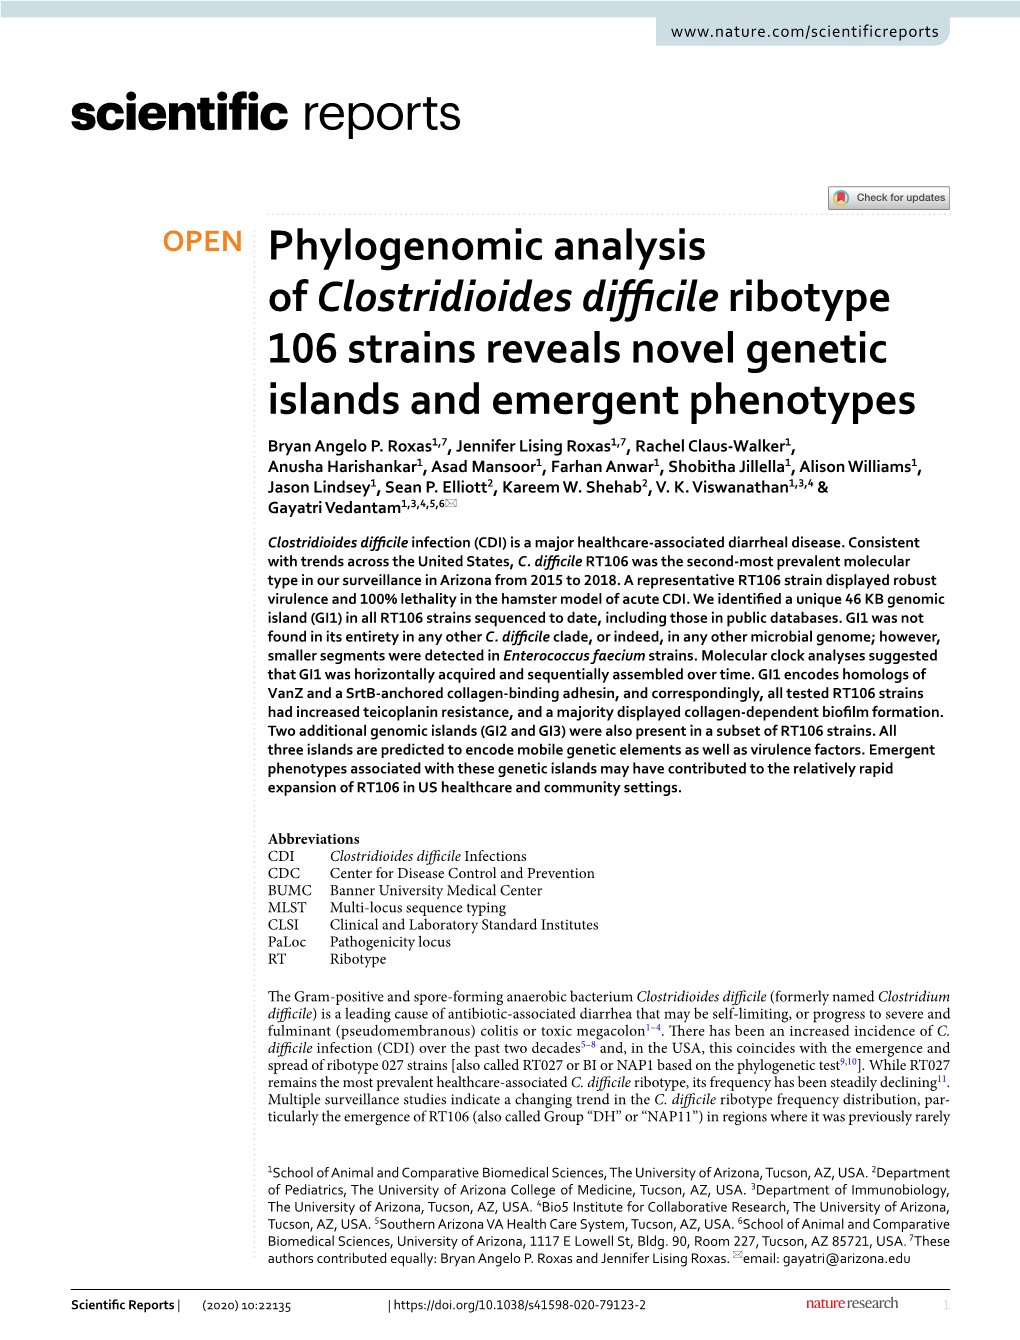 Phylogenomic Analysis of Clostridioides Difficile Ribotype 106